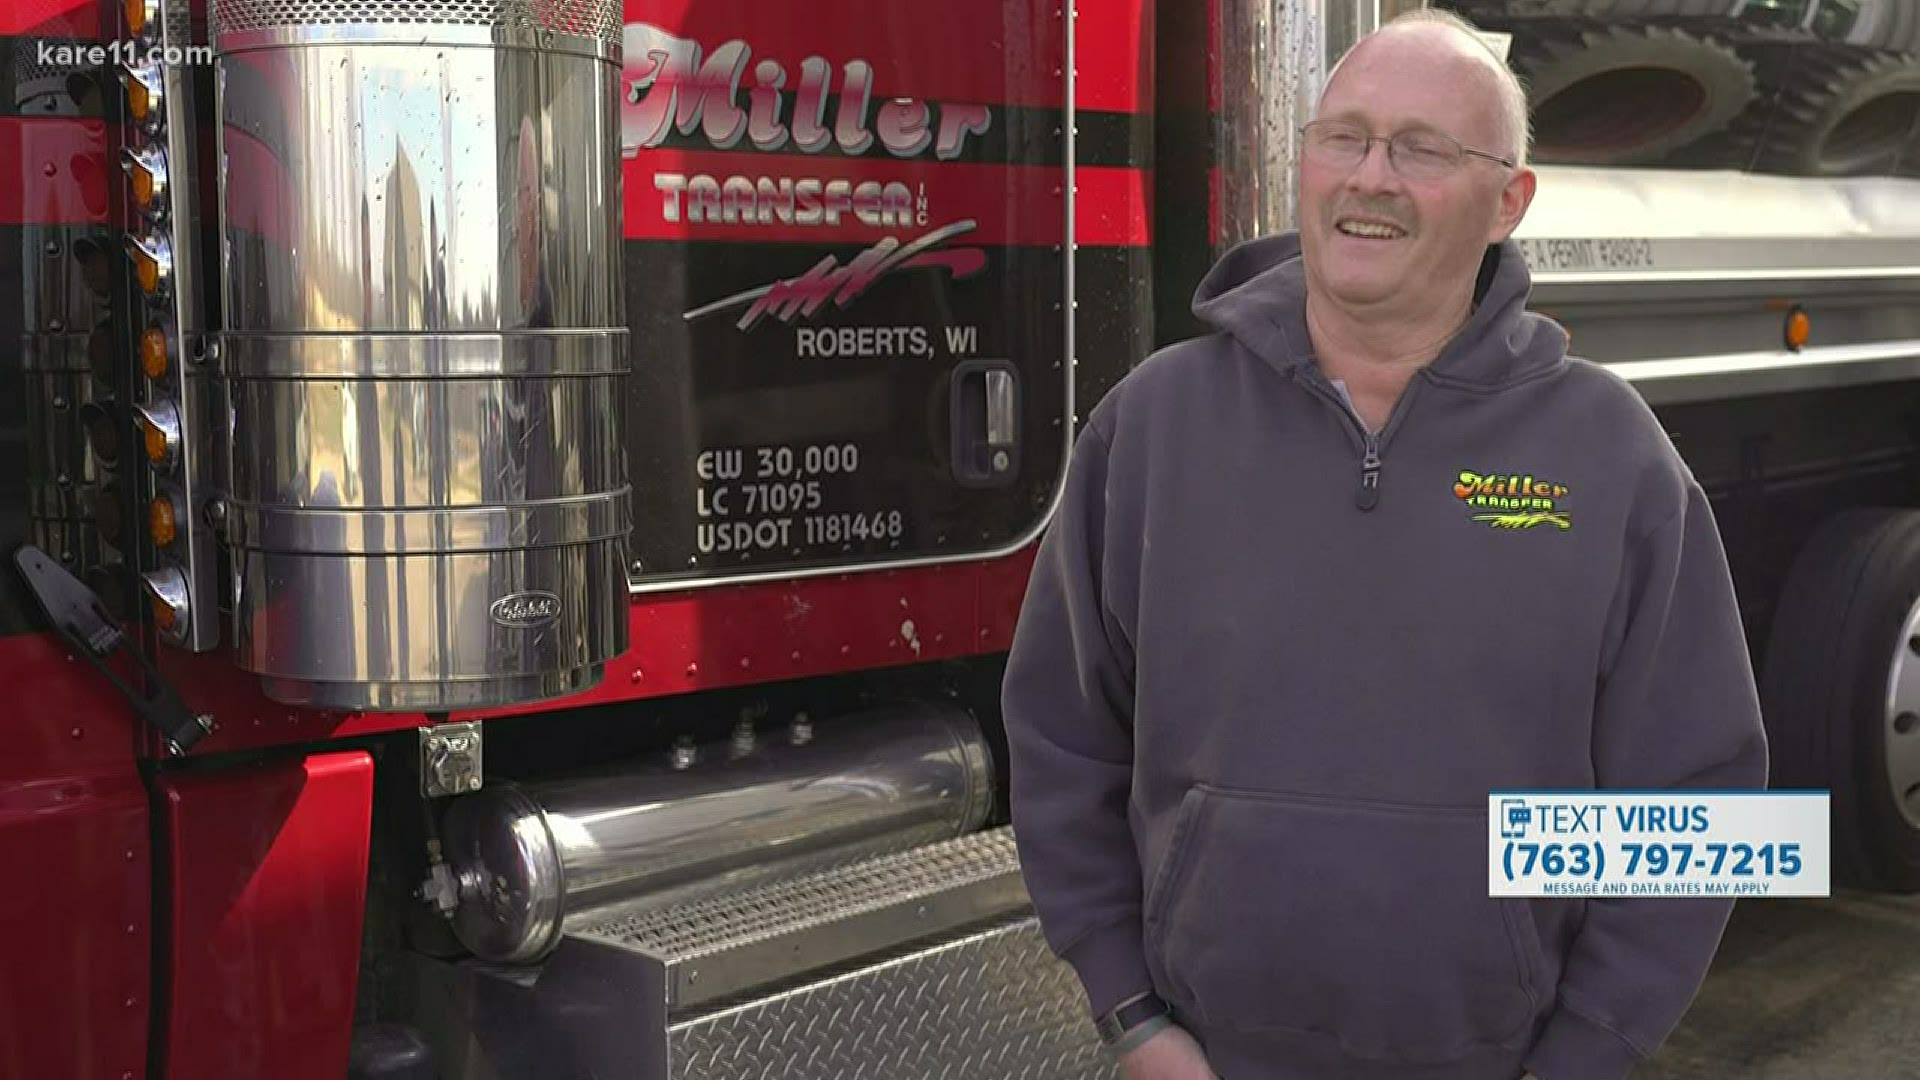 Rich Miller, a milk truck driver for Ellsworth Coop Creamery put in $5000 of his own money to start a fund to buy cheese curds for food shelves.